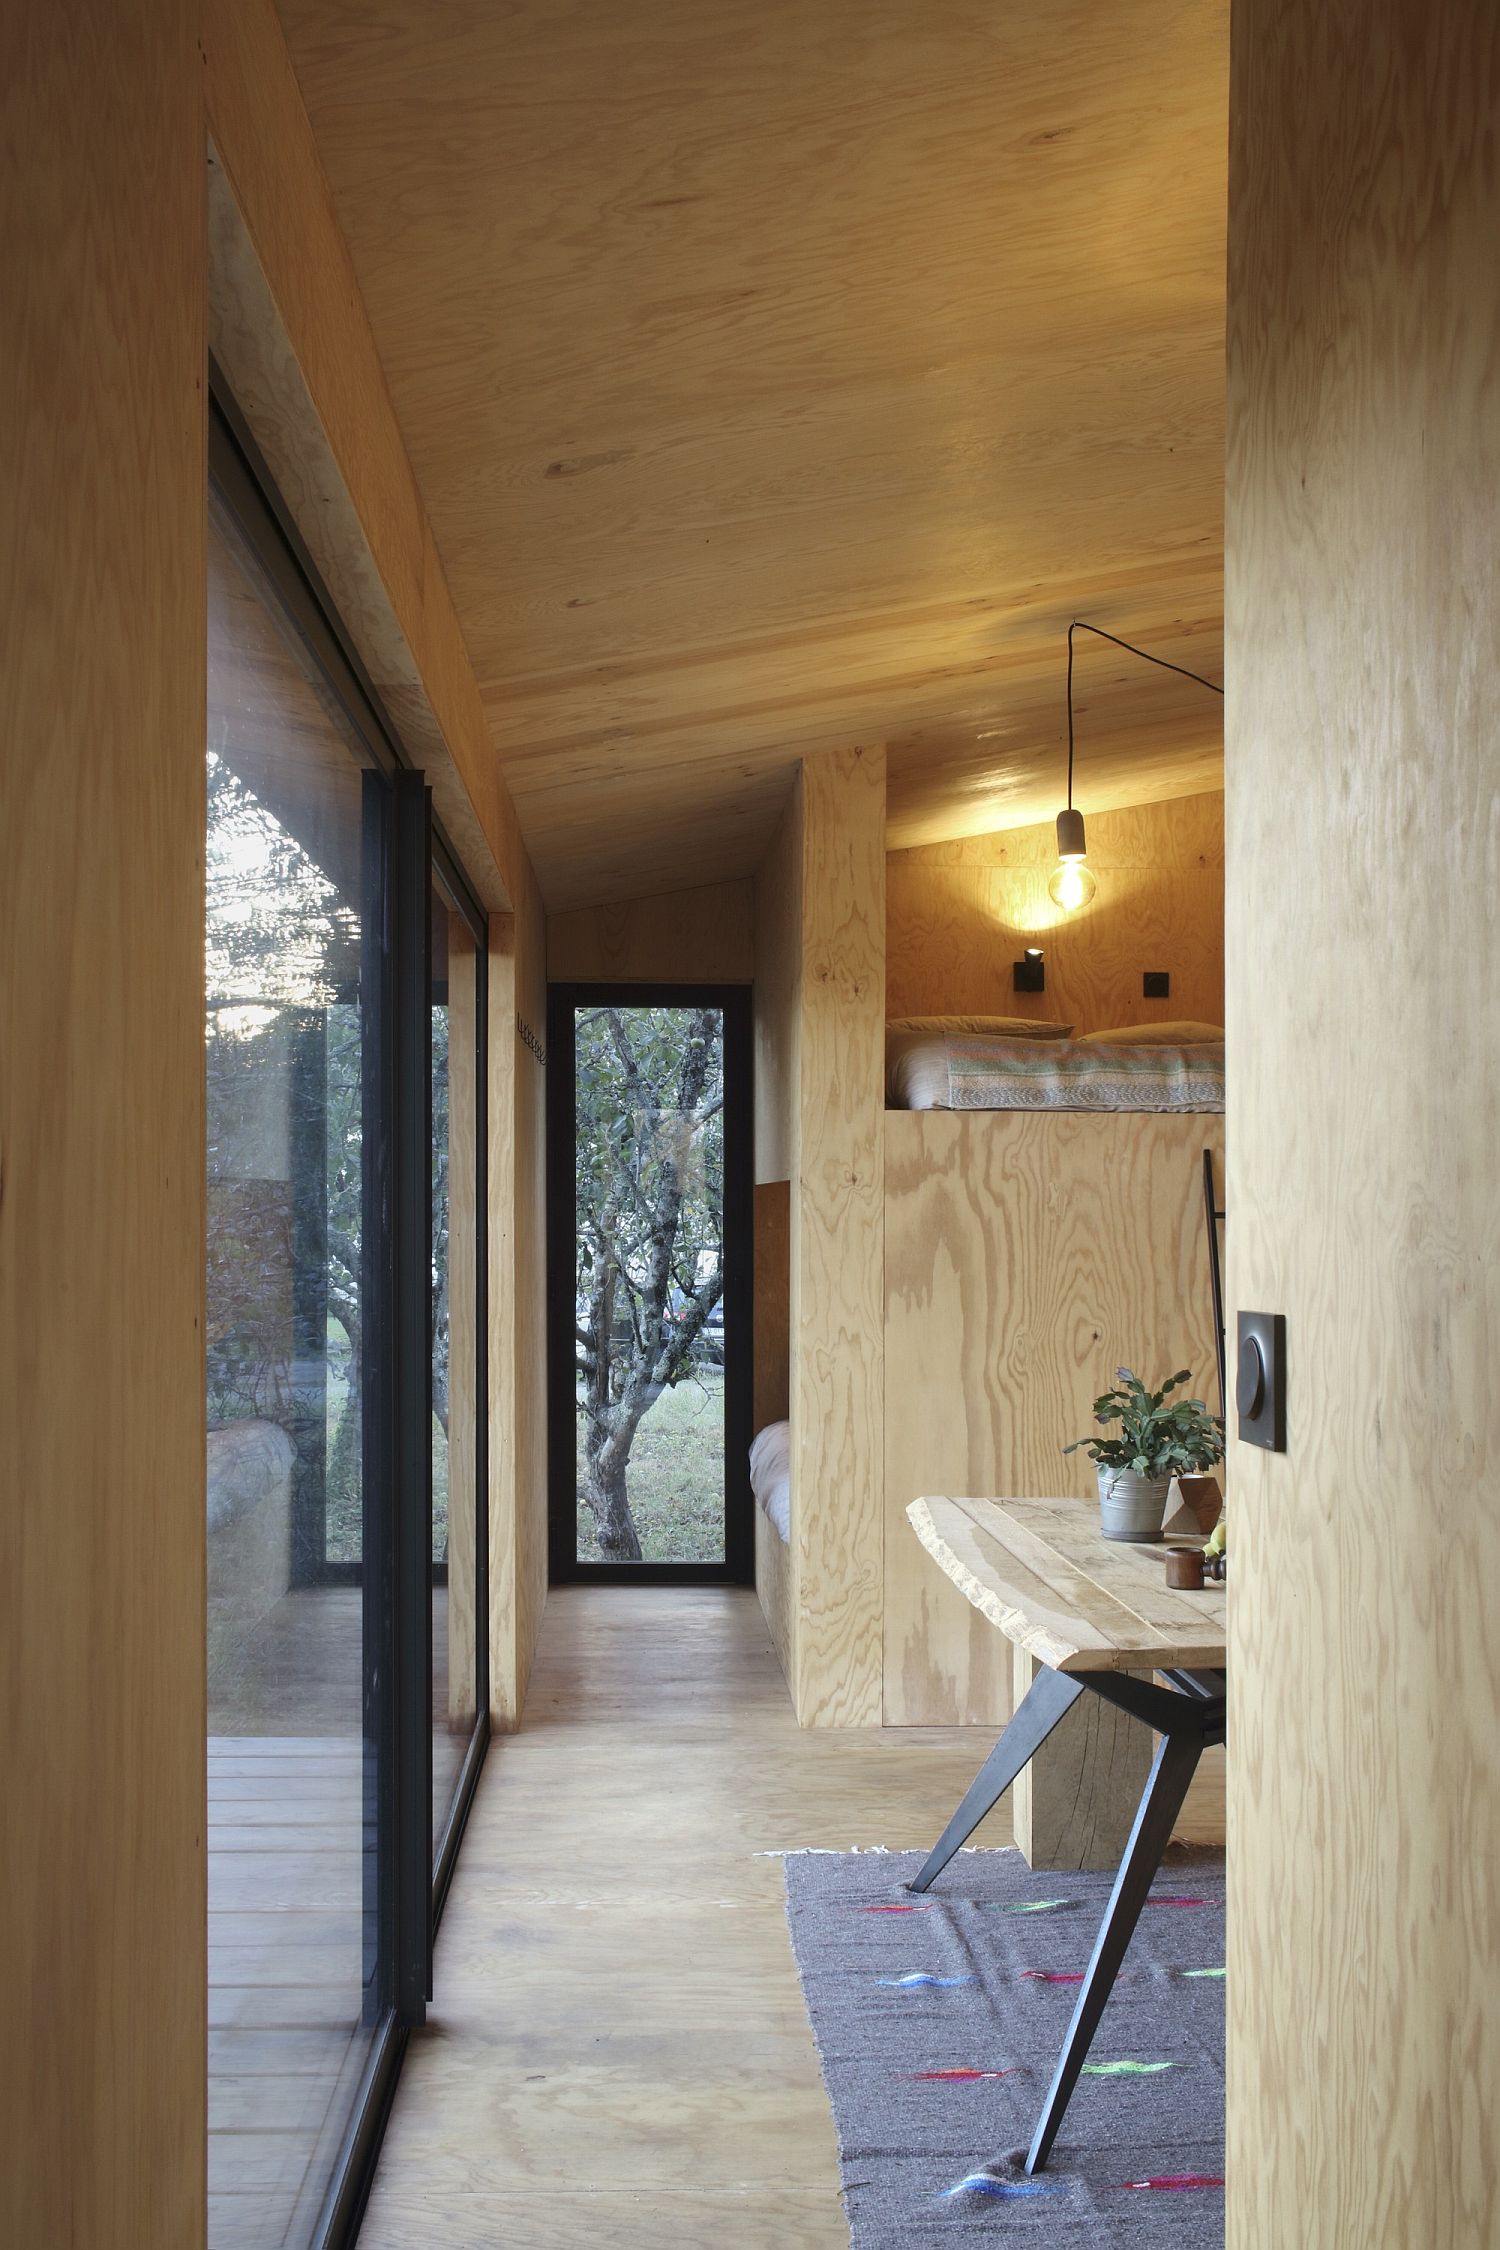 Lighting-inside-the-cabin-complements-natural-lighting